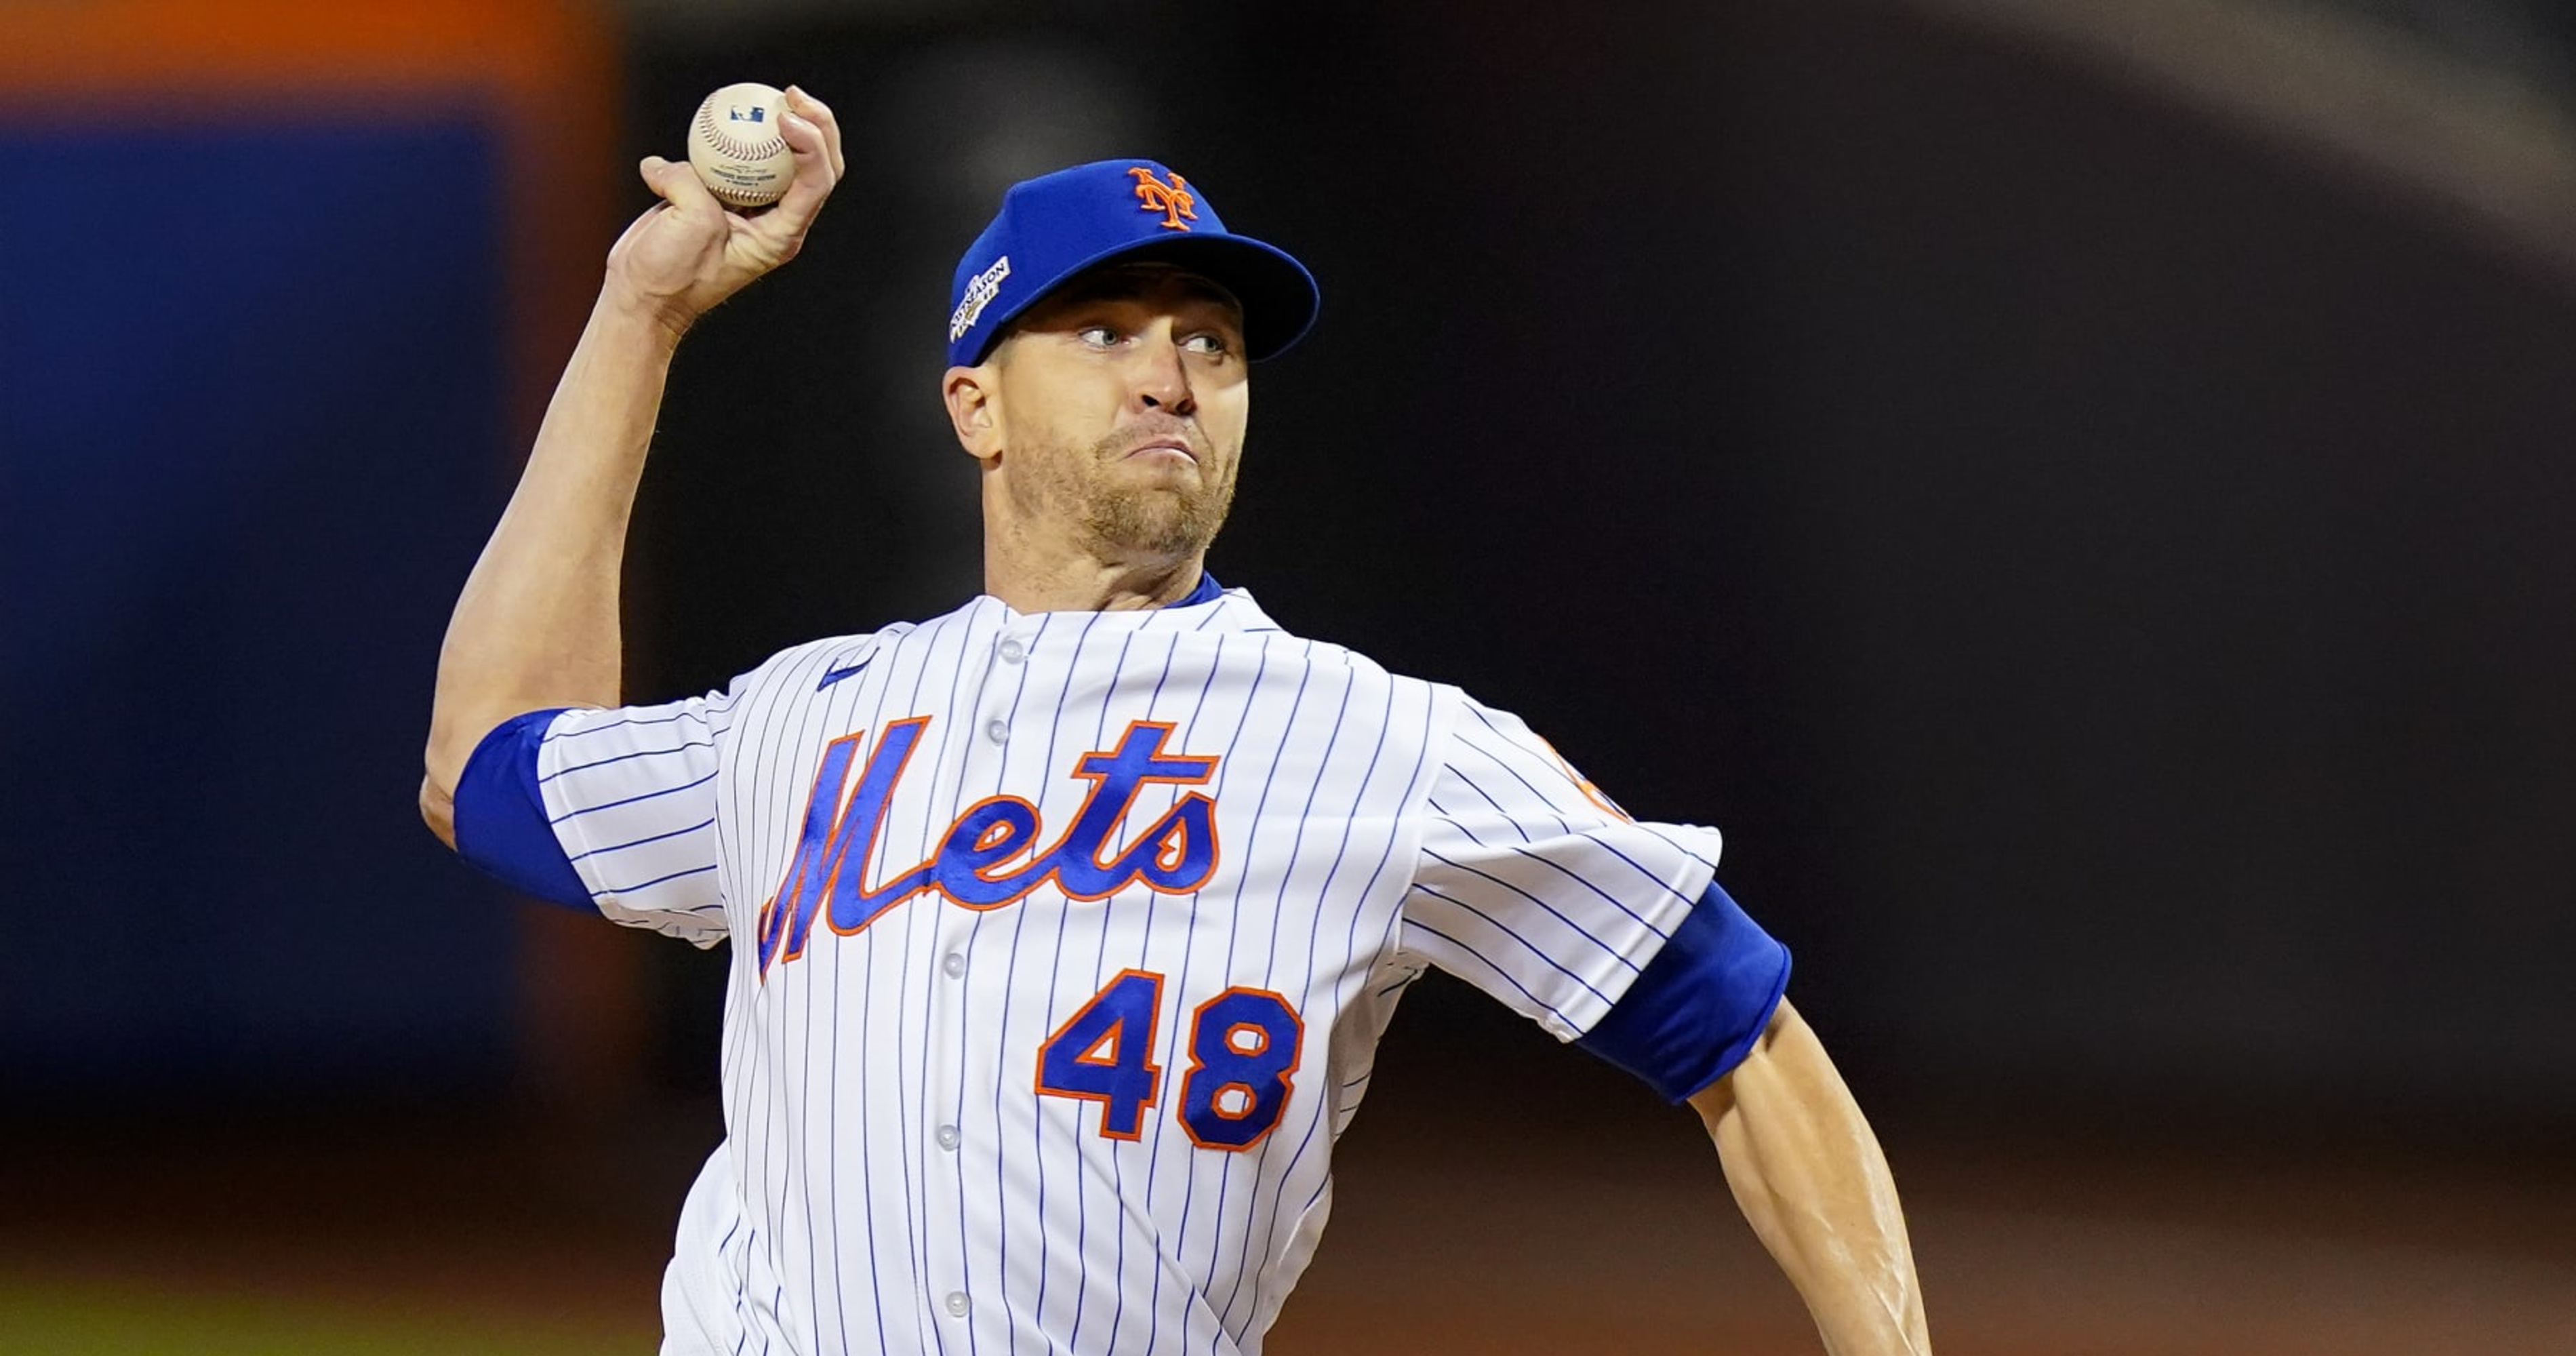 Jacob deGrom Said He Wants to Stay with Mets in MLB Free Agency, Mark Canha Says